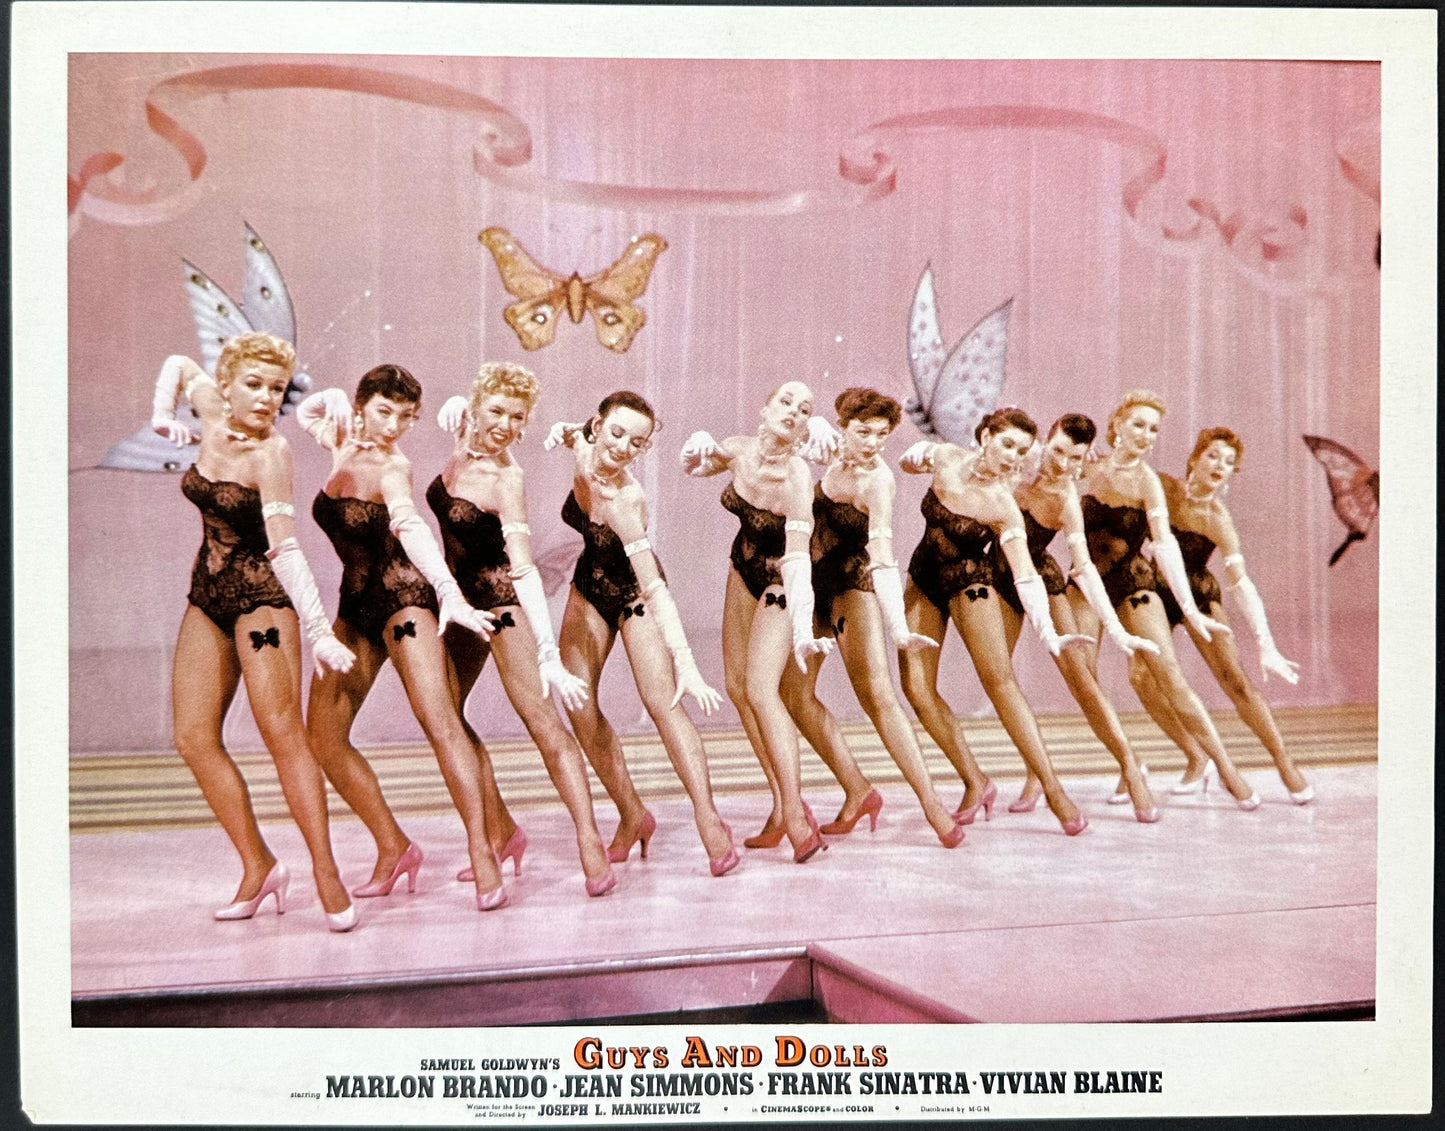 Guys And Dolls US Lobby Card (1955) - ORIGINAL RELEASE - posterpalace.com